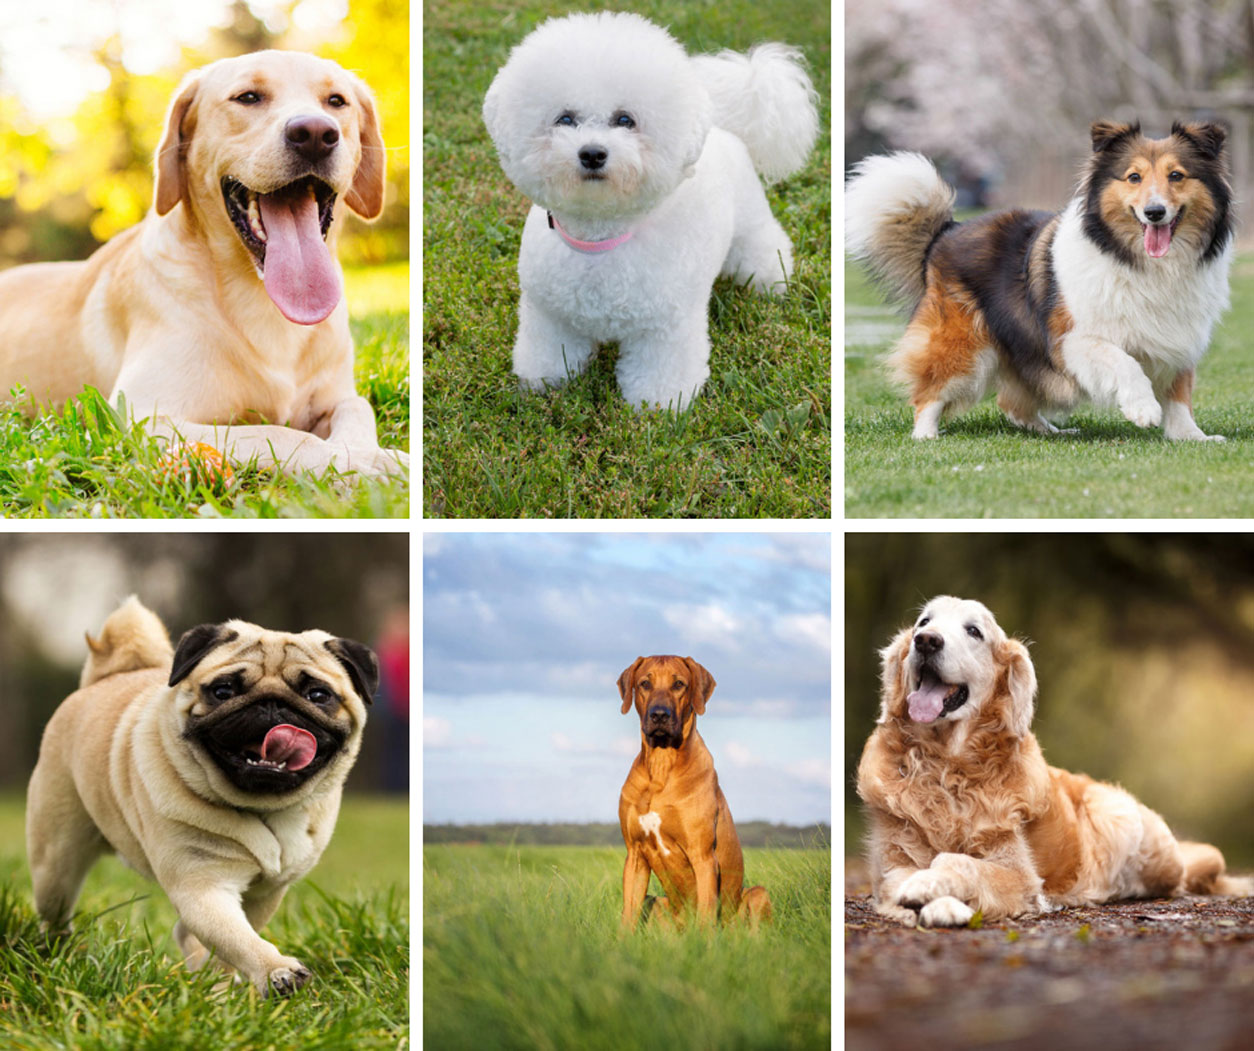 autism friendly small dog breeds